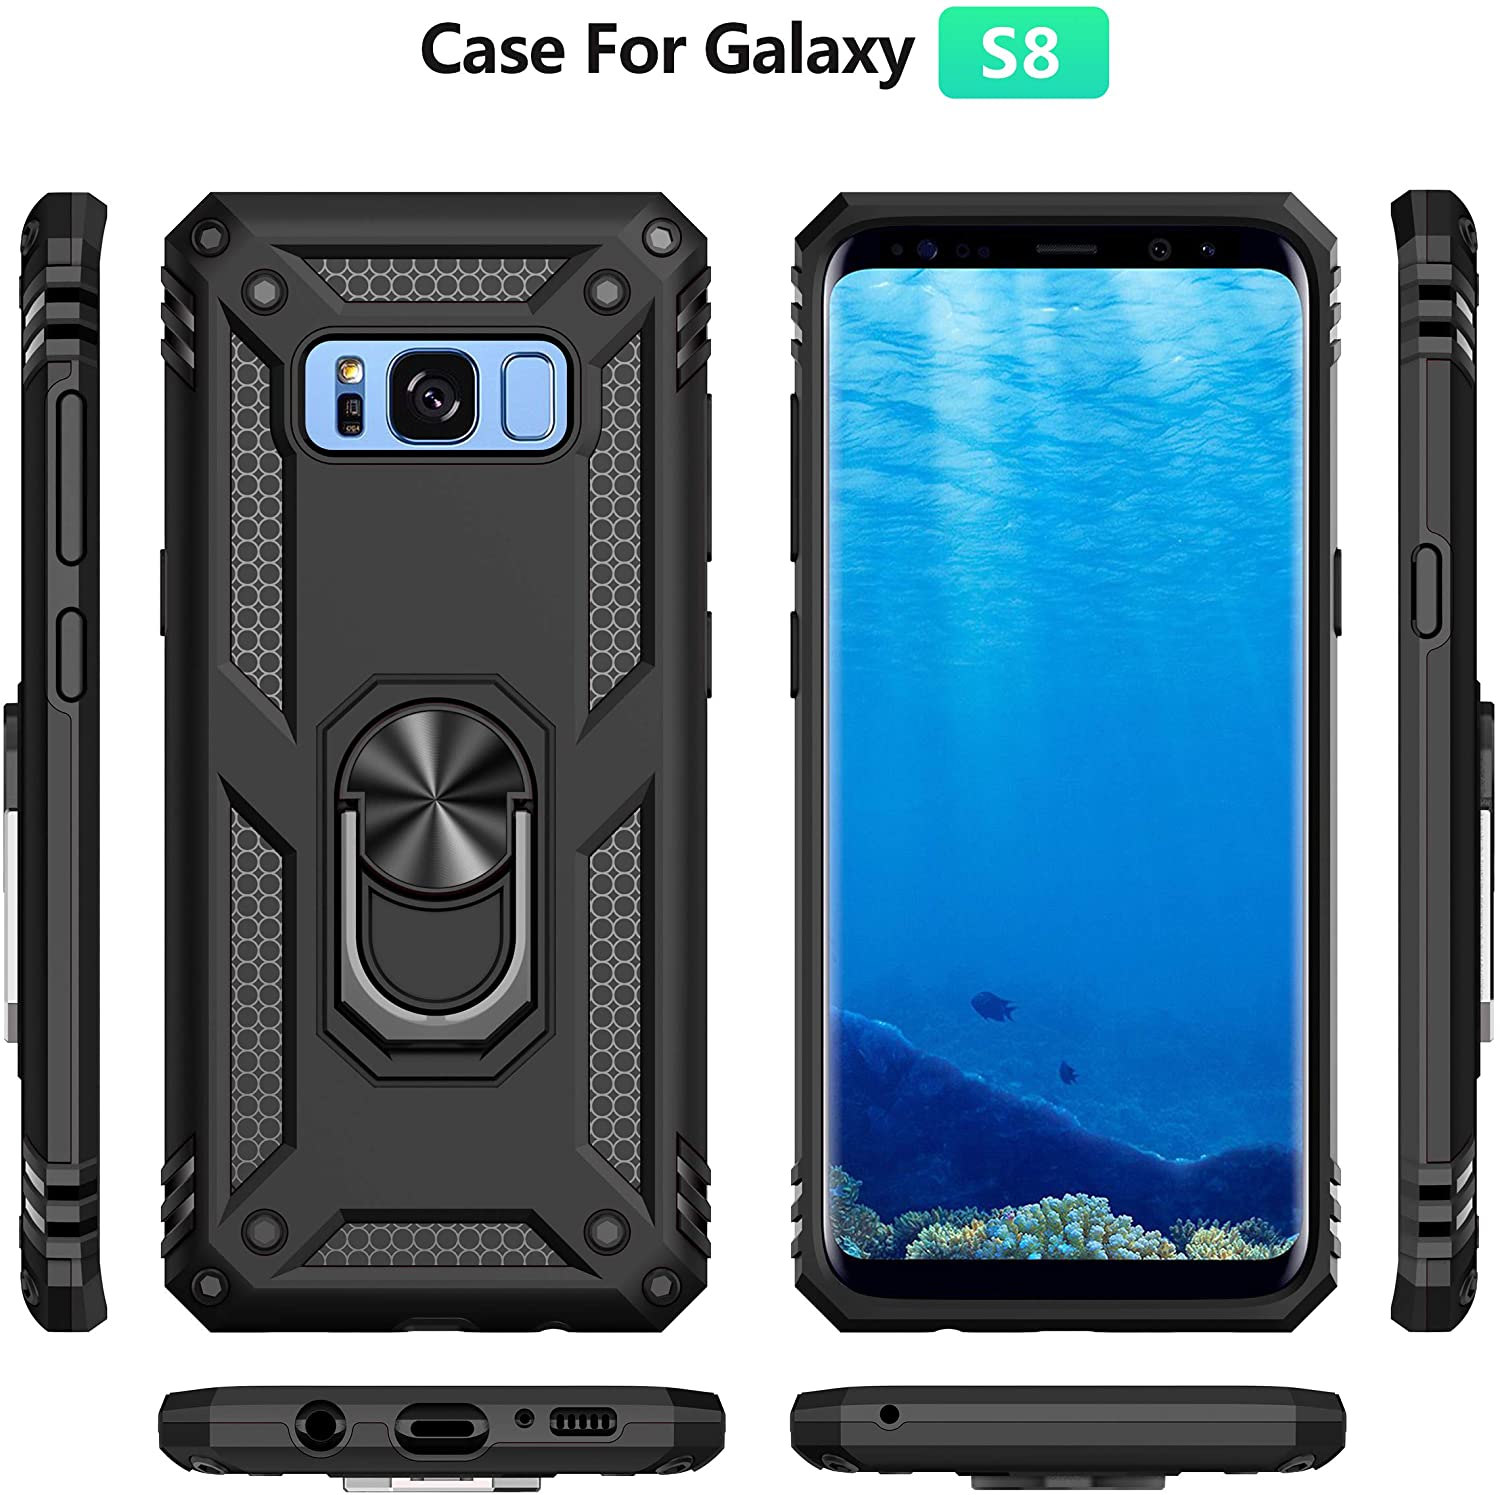 Samsung Galaxy S8 Plus Case with HD Screen Protectors - BLACK - e4cents